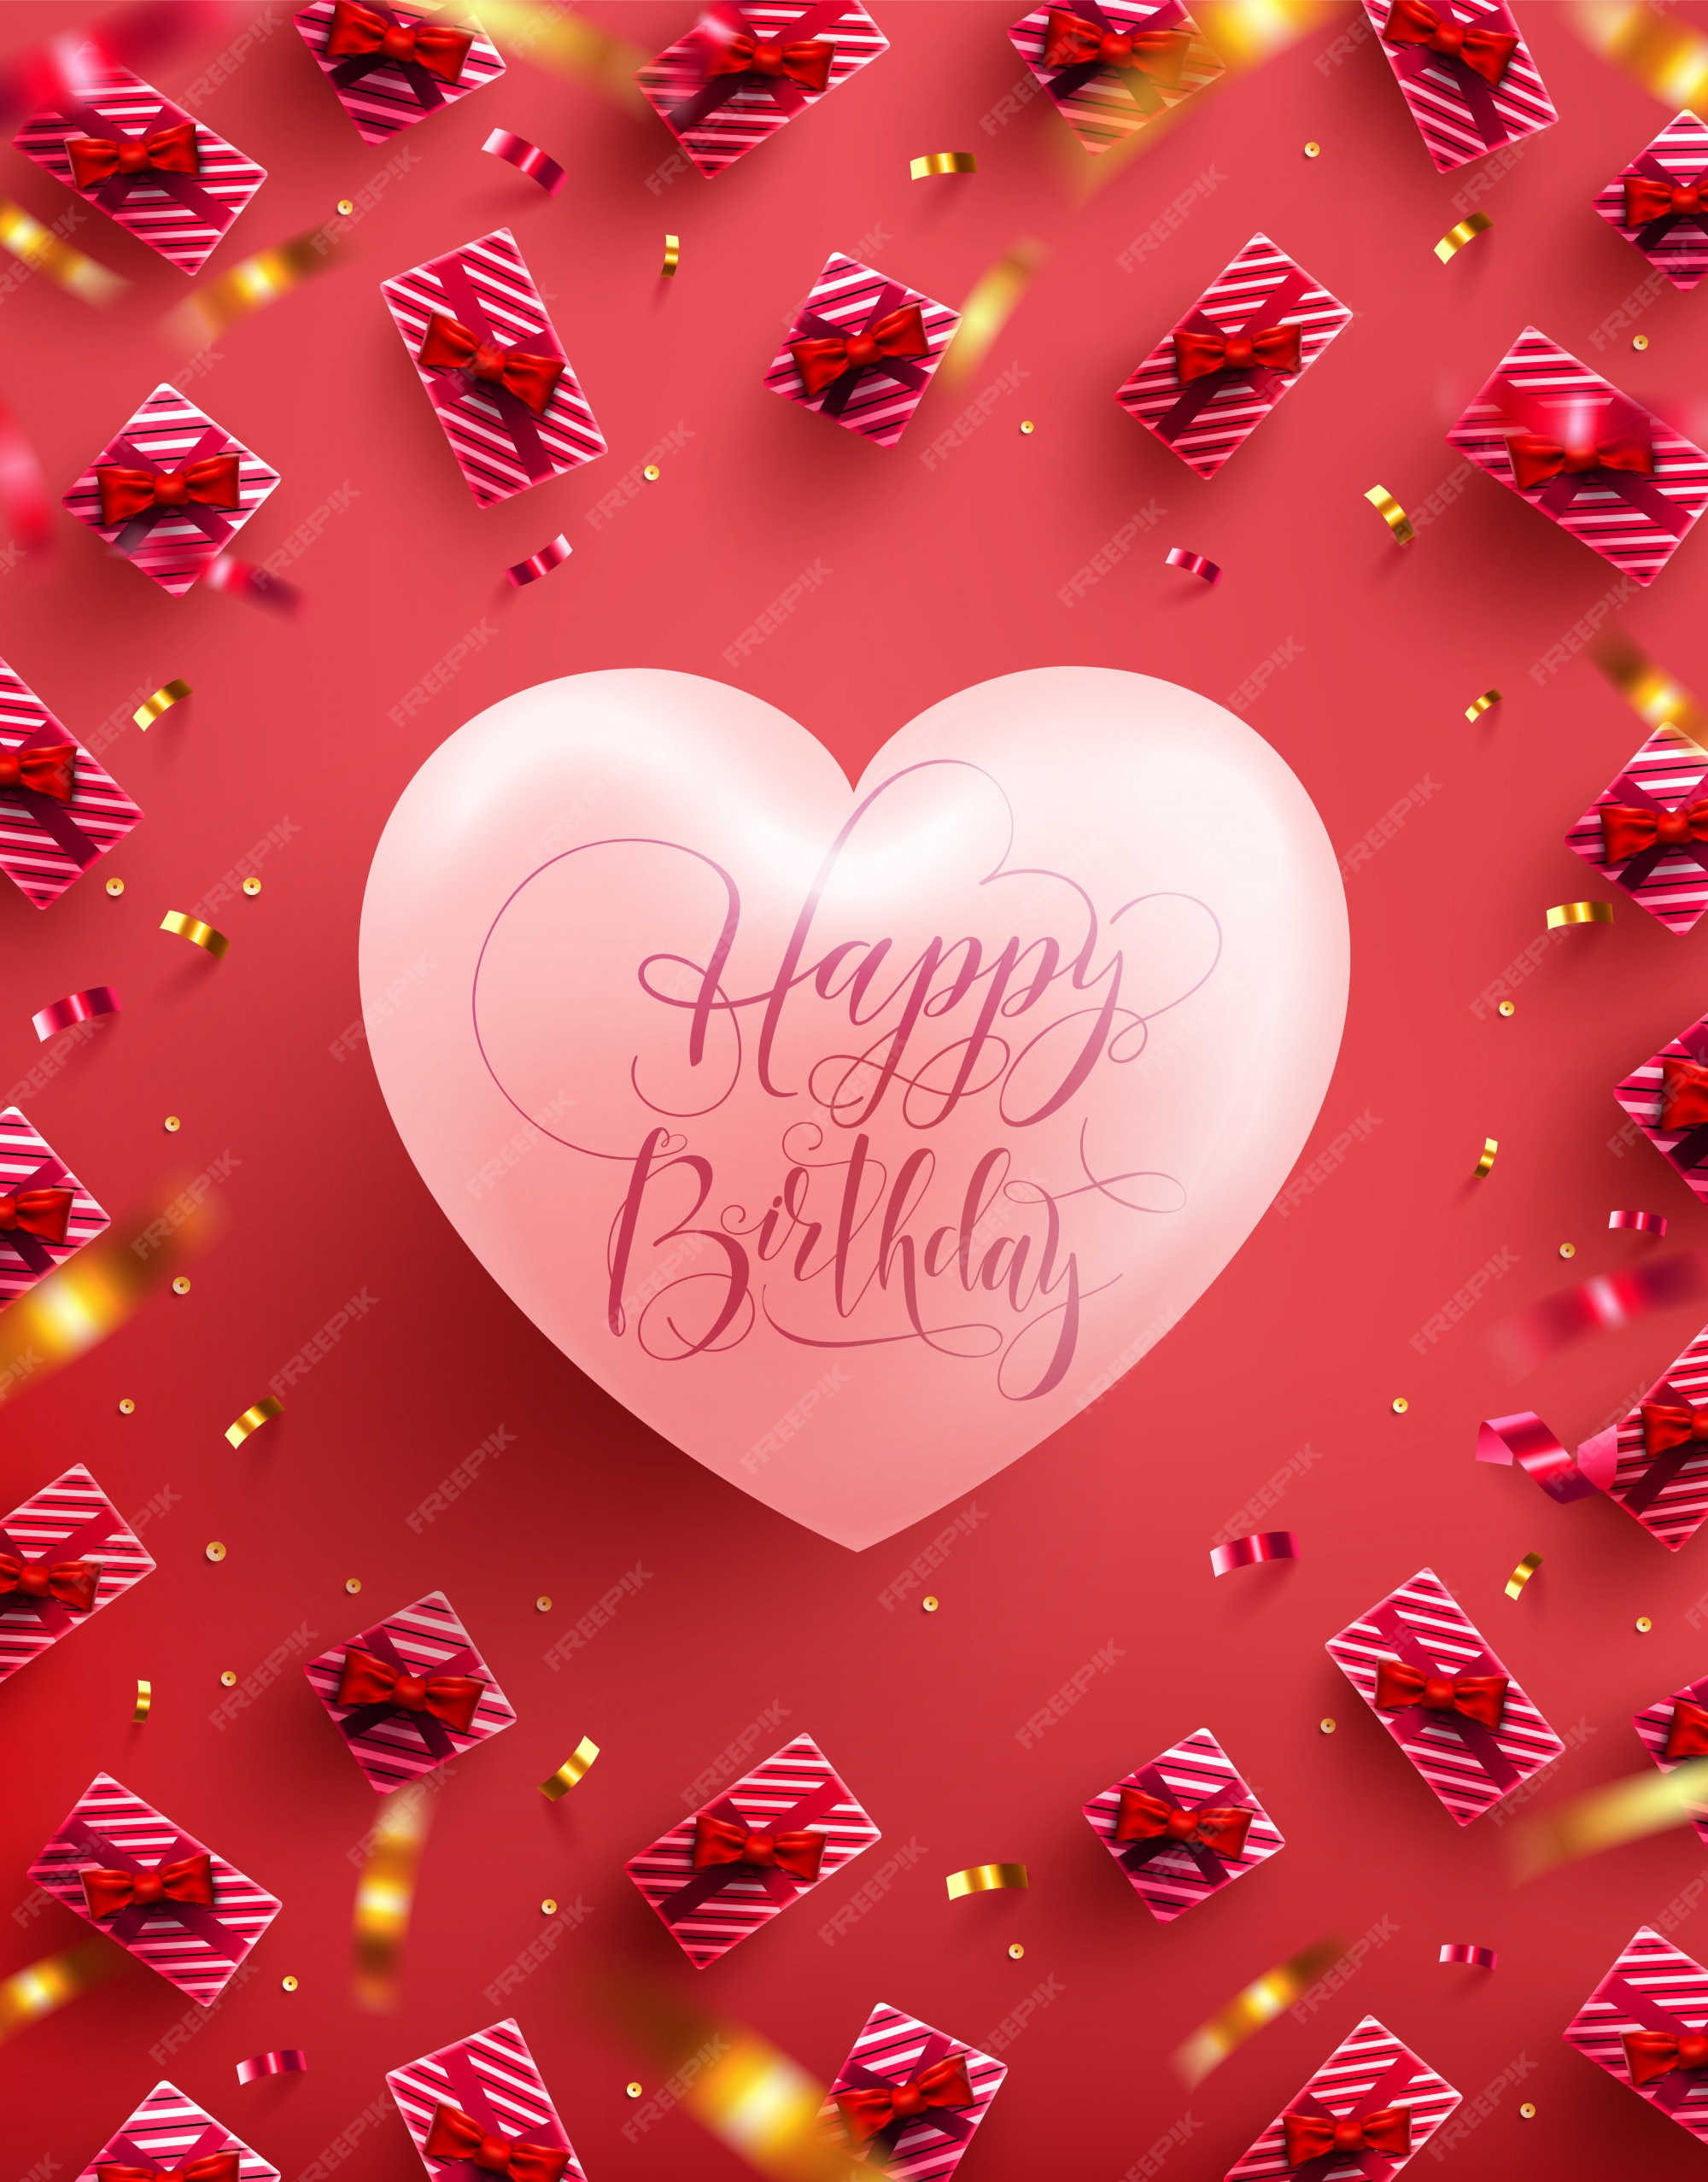 Page 3 | Happy Birthday My Love Images - Free Download on Freepik